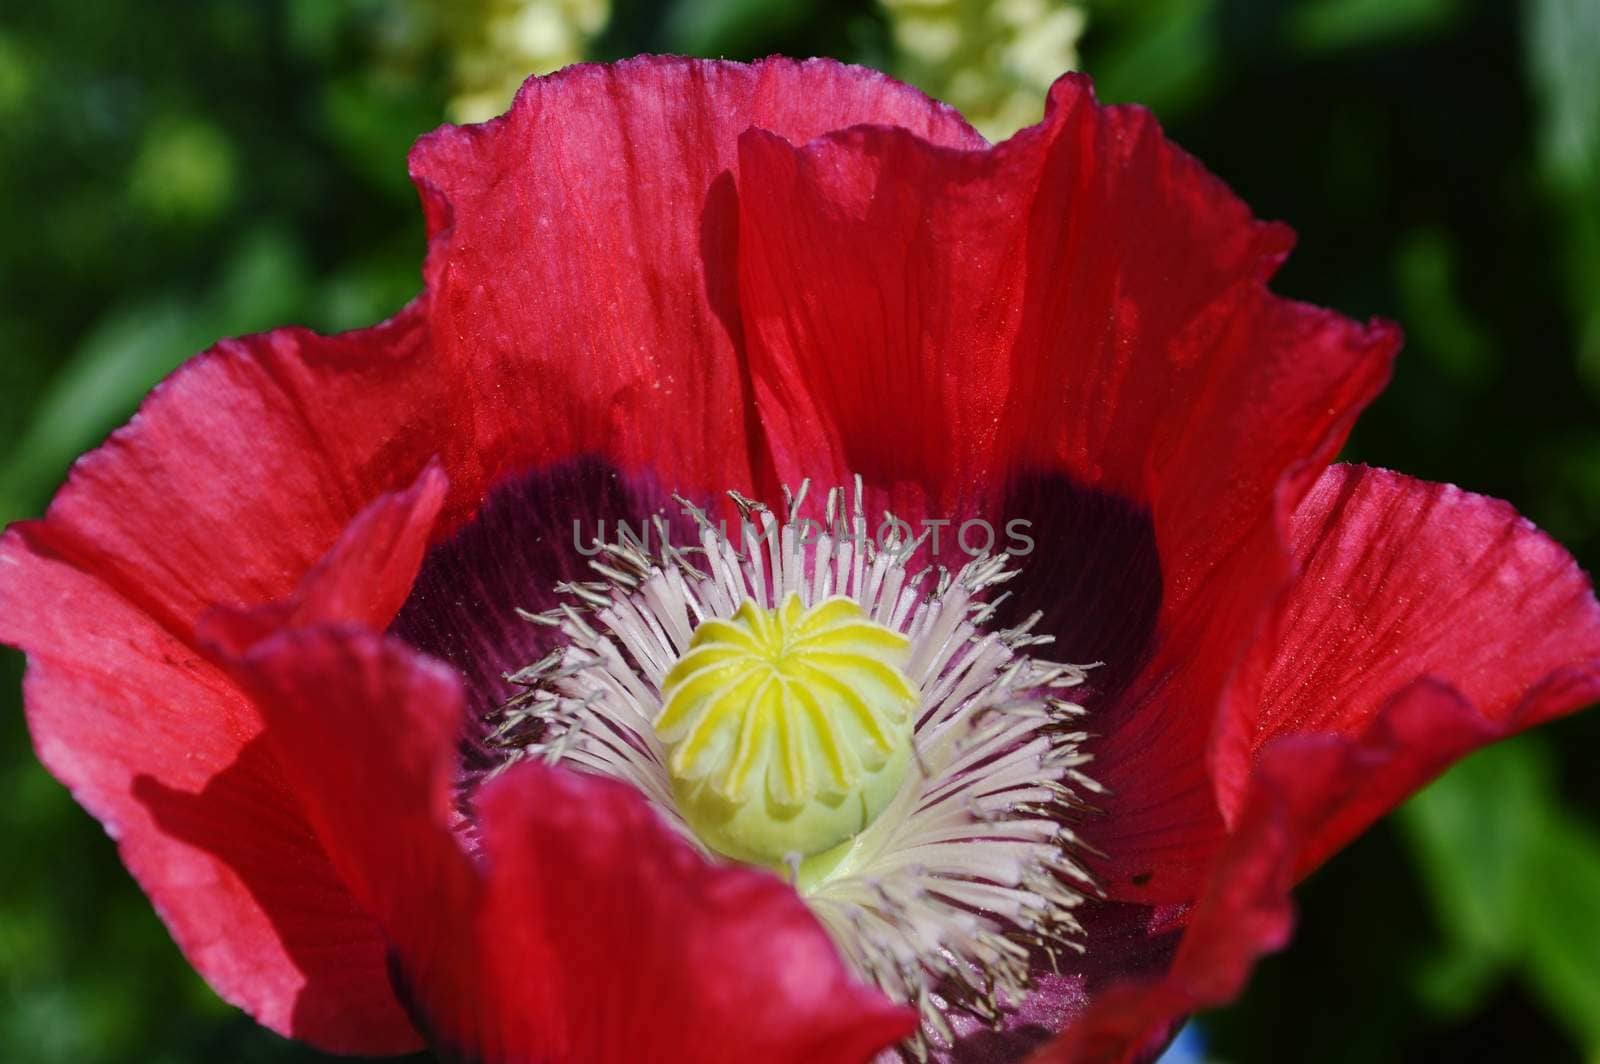 Close-up image of a colourful Opium Poppy.